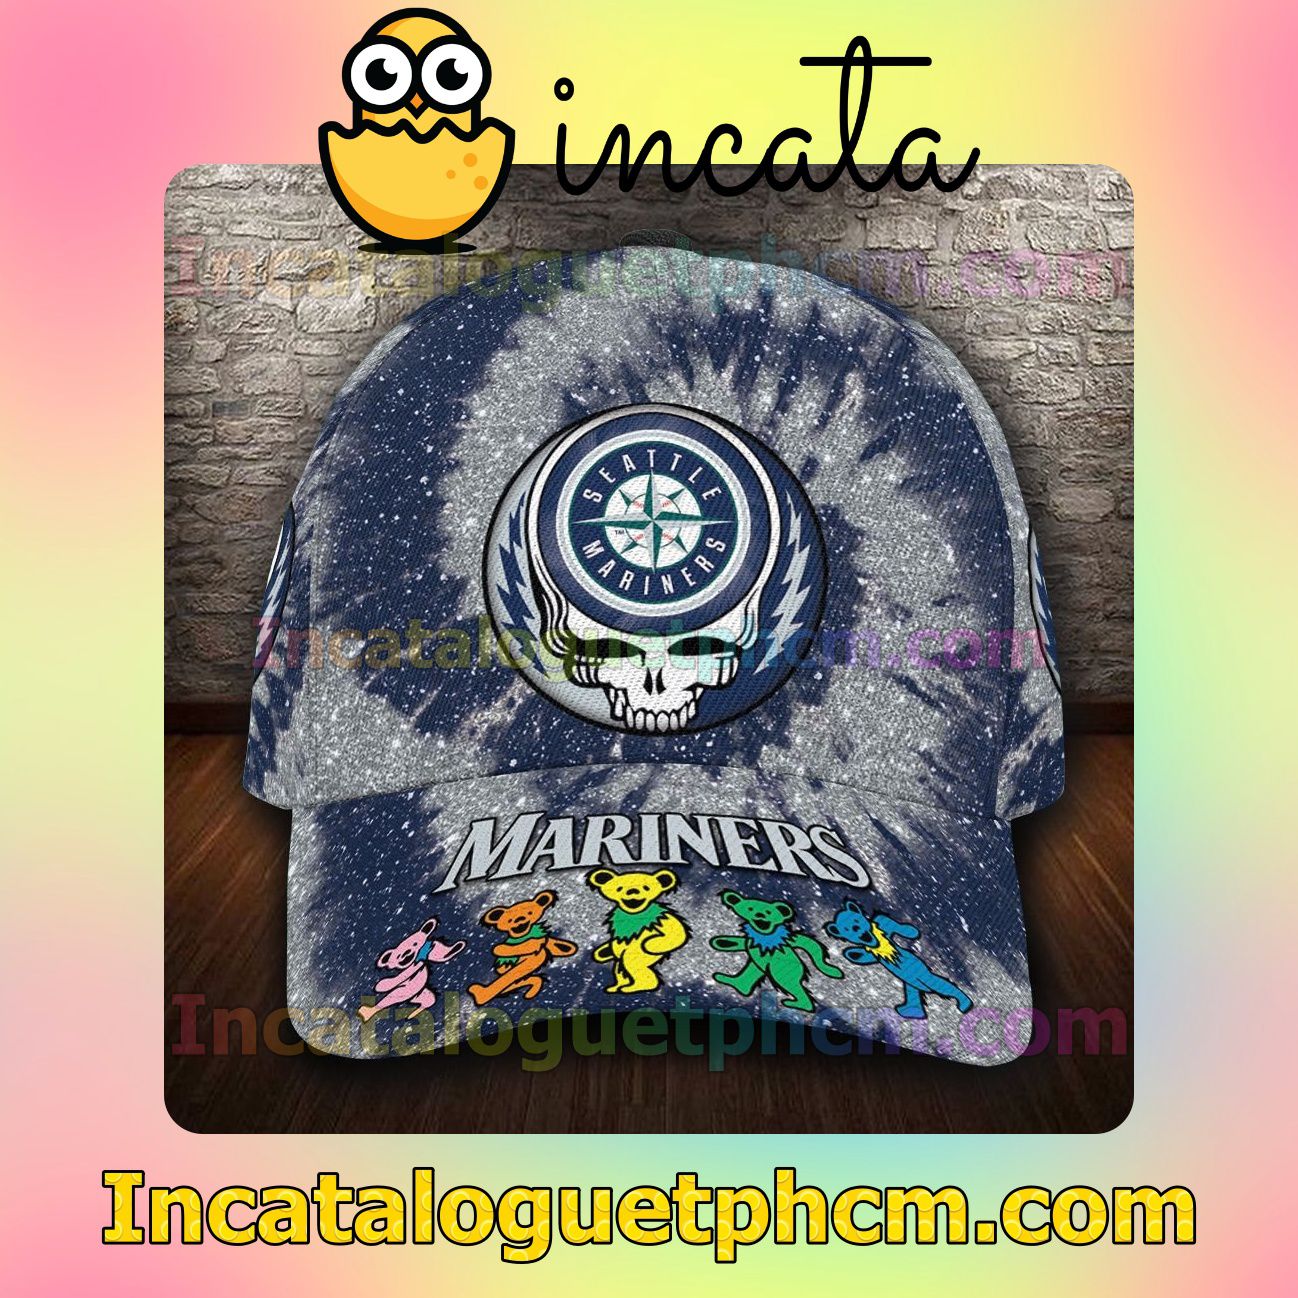 Print On Demand Seattle Mariners & Grateful Dead Band MLB Customized Hat Caps